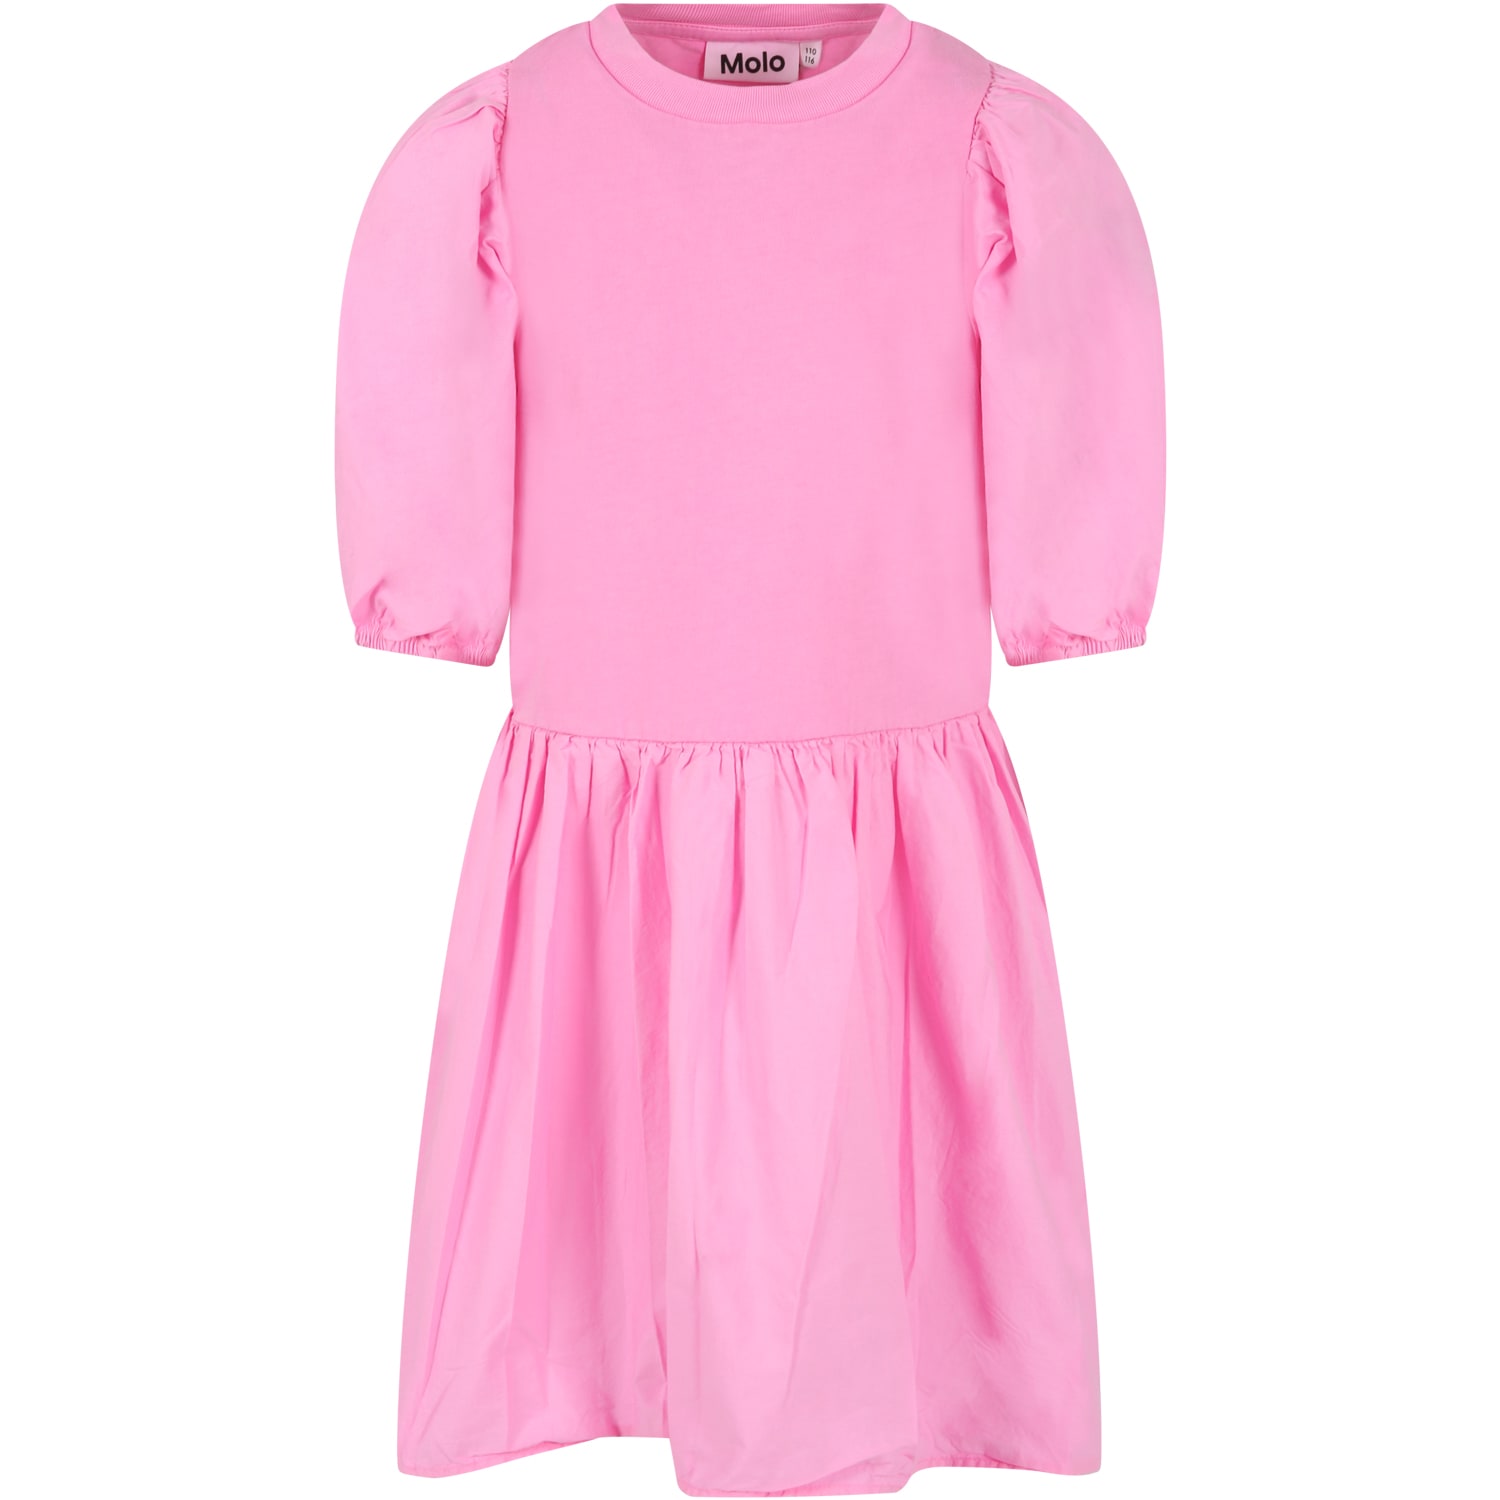 MOLO PINK DRESS FOR GIRL WITH RUFFLES AND LOGO PATCH